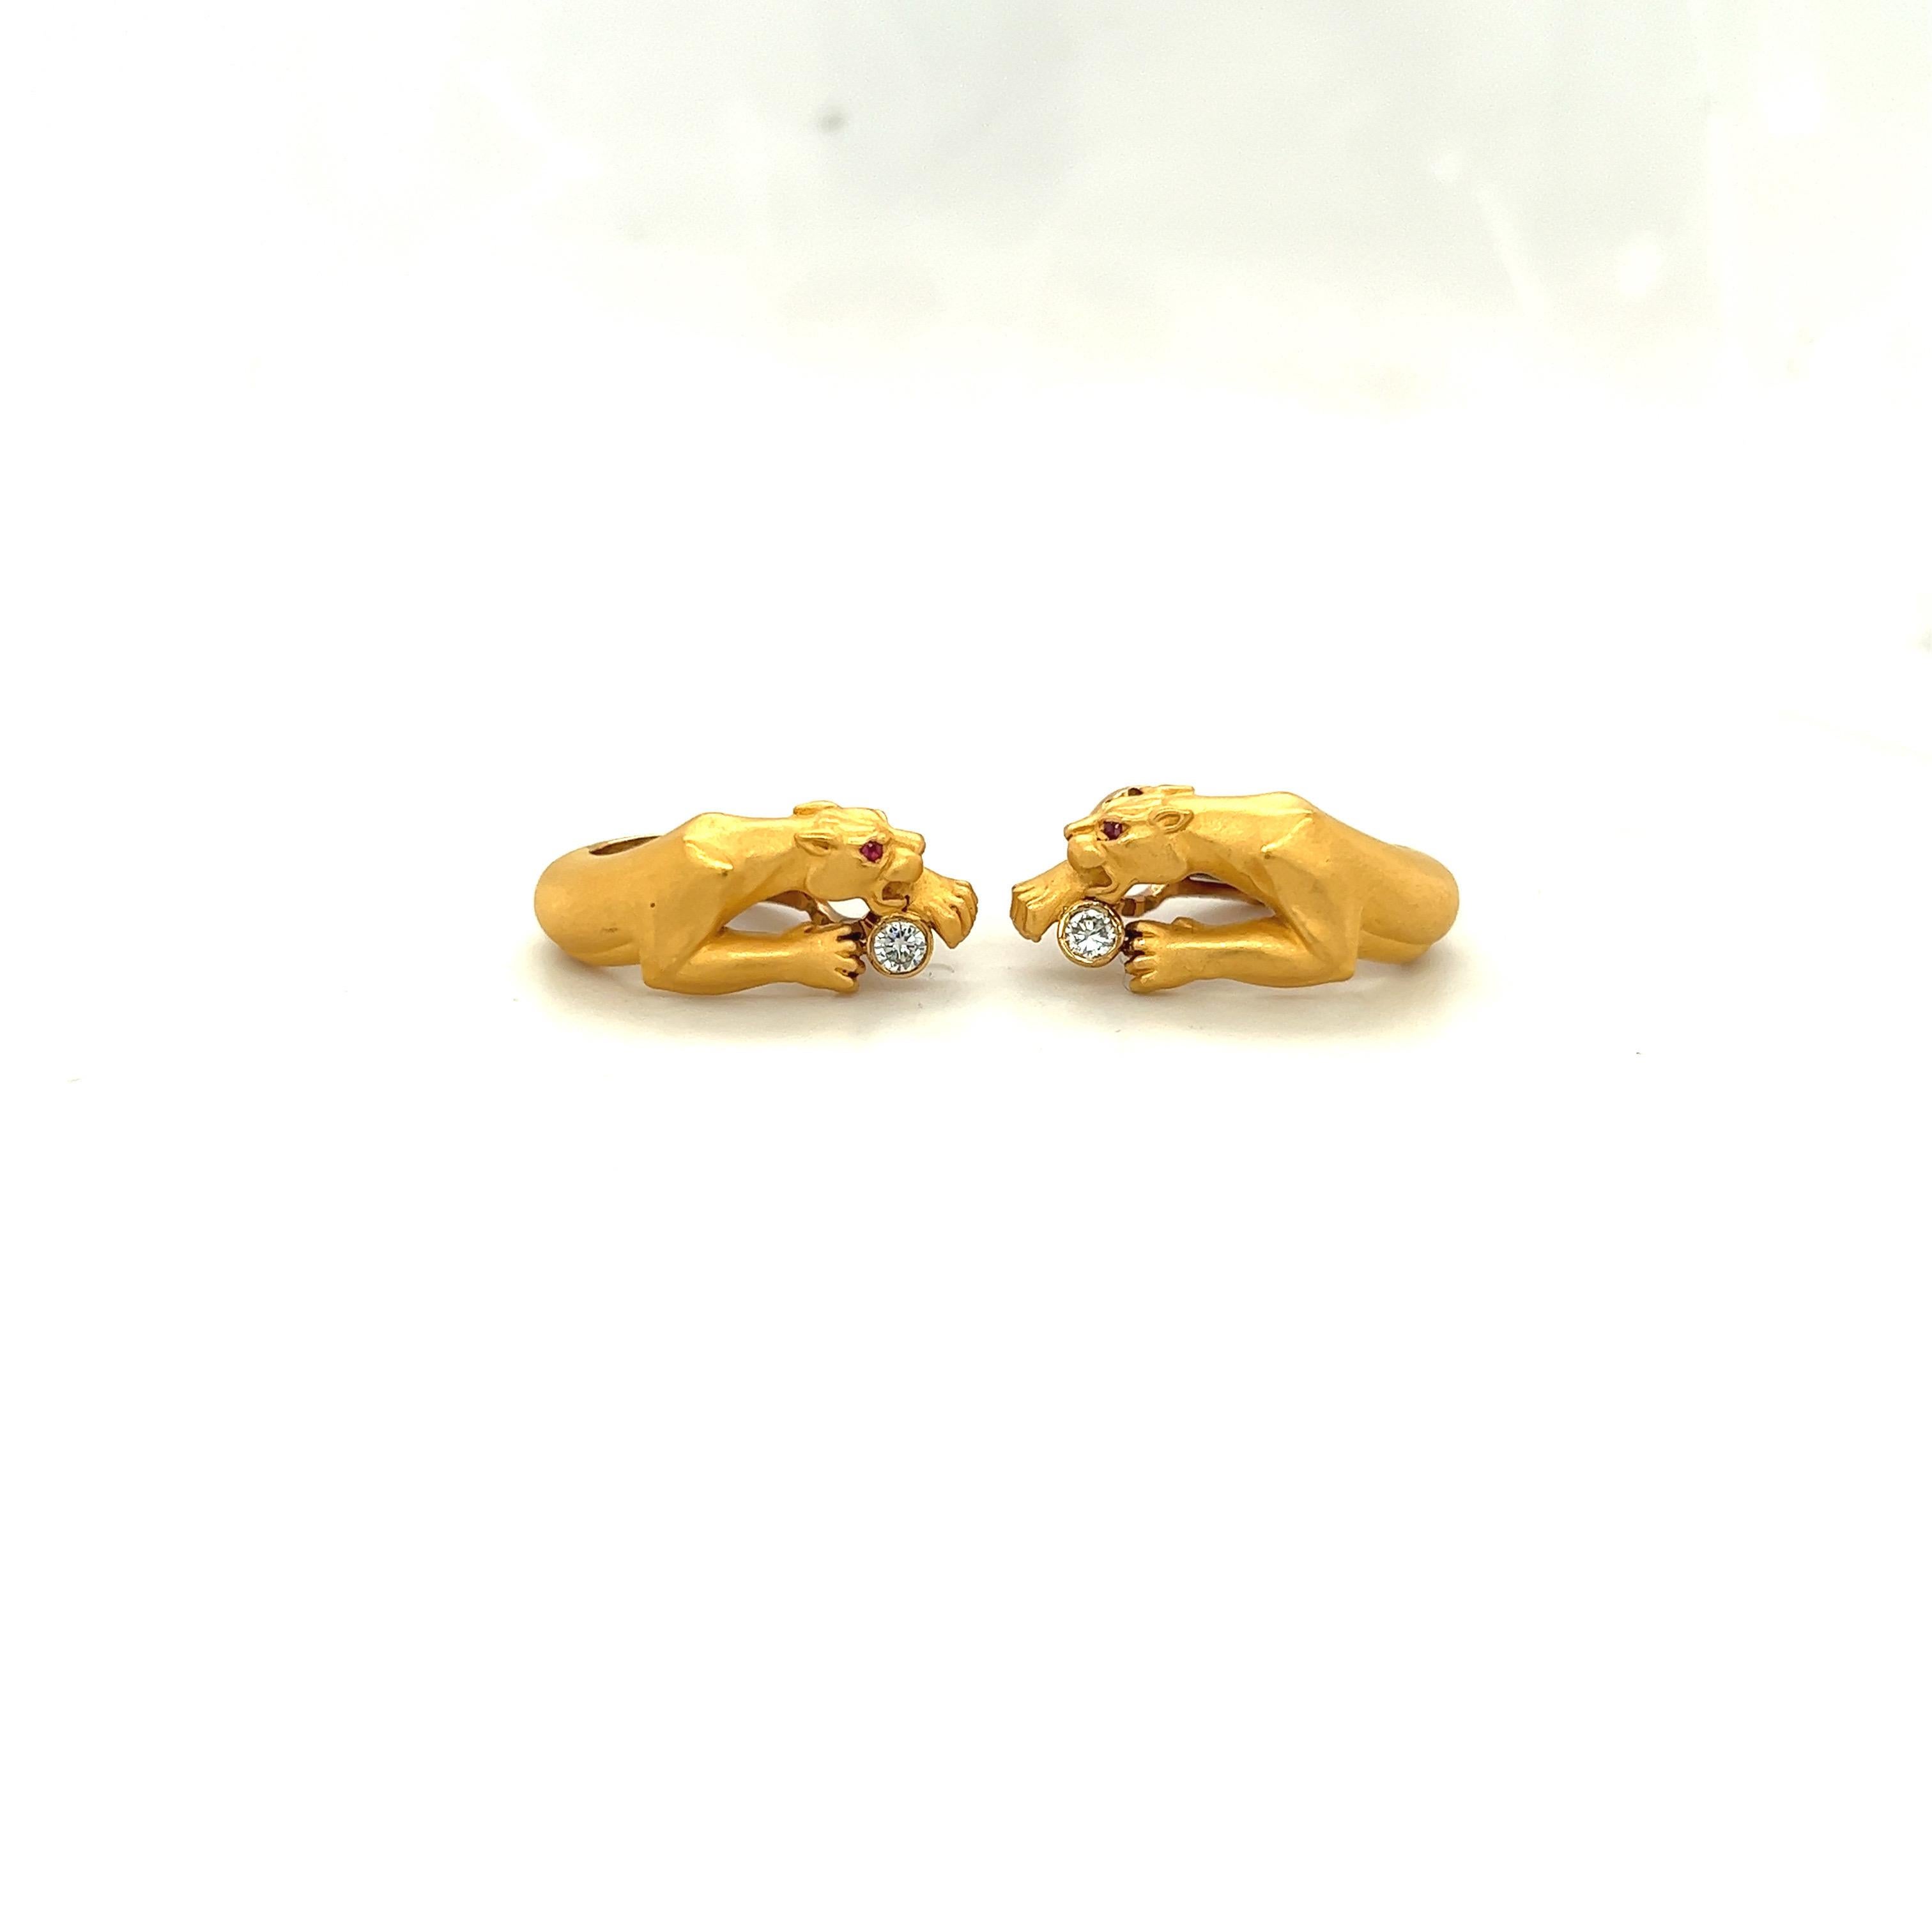 Carrera Y Carrera has built its its famous name on figurative designs, an obsession with surface finishes, and a compelling way of seeing beauty in art and nature.
These 18 karat yellow gold earrings are the perfect example of Carrera's iconic